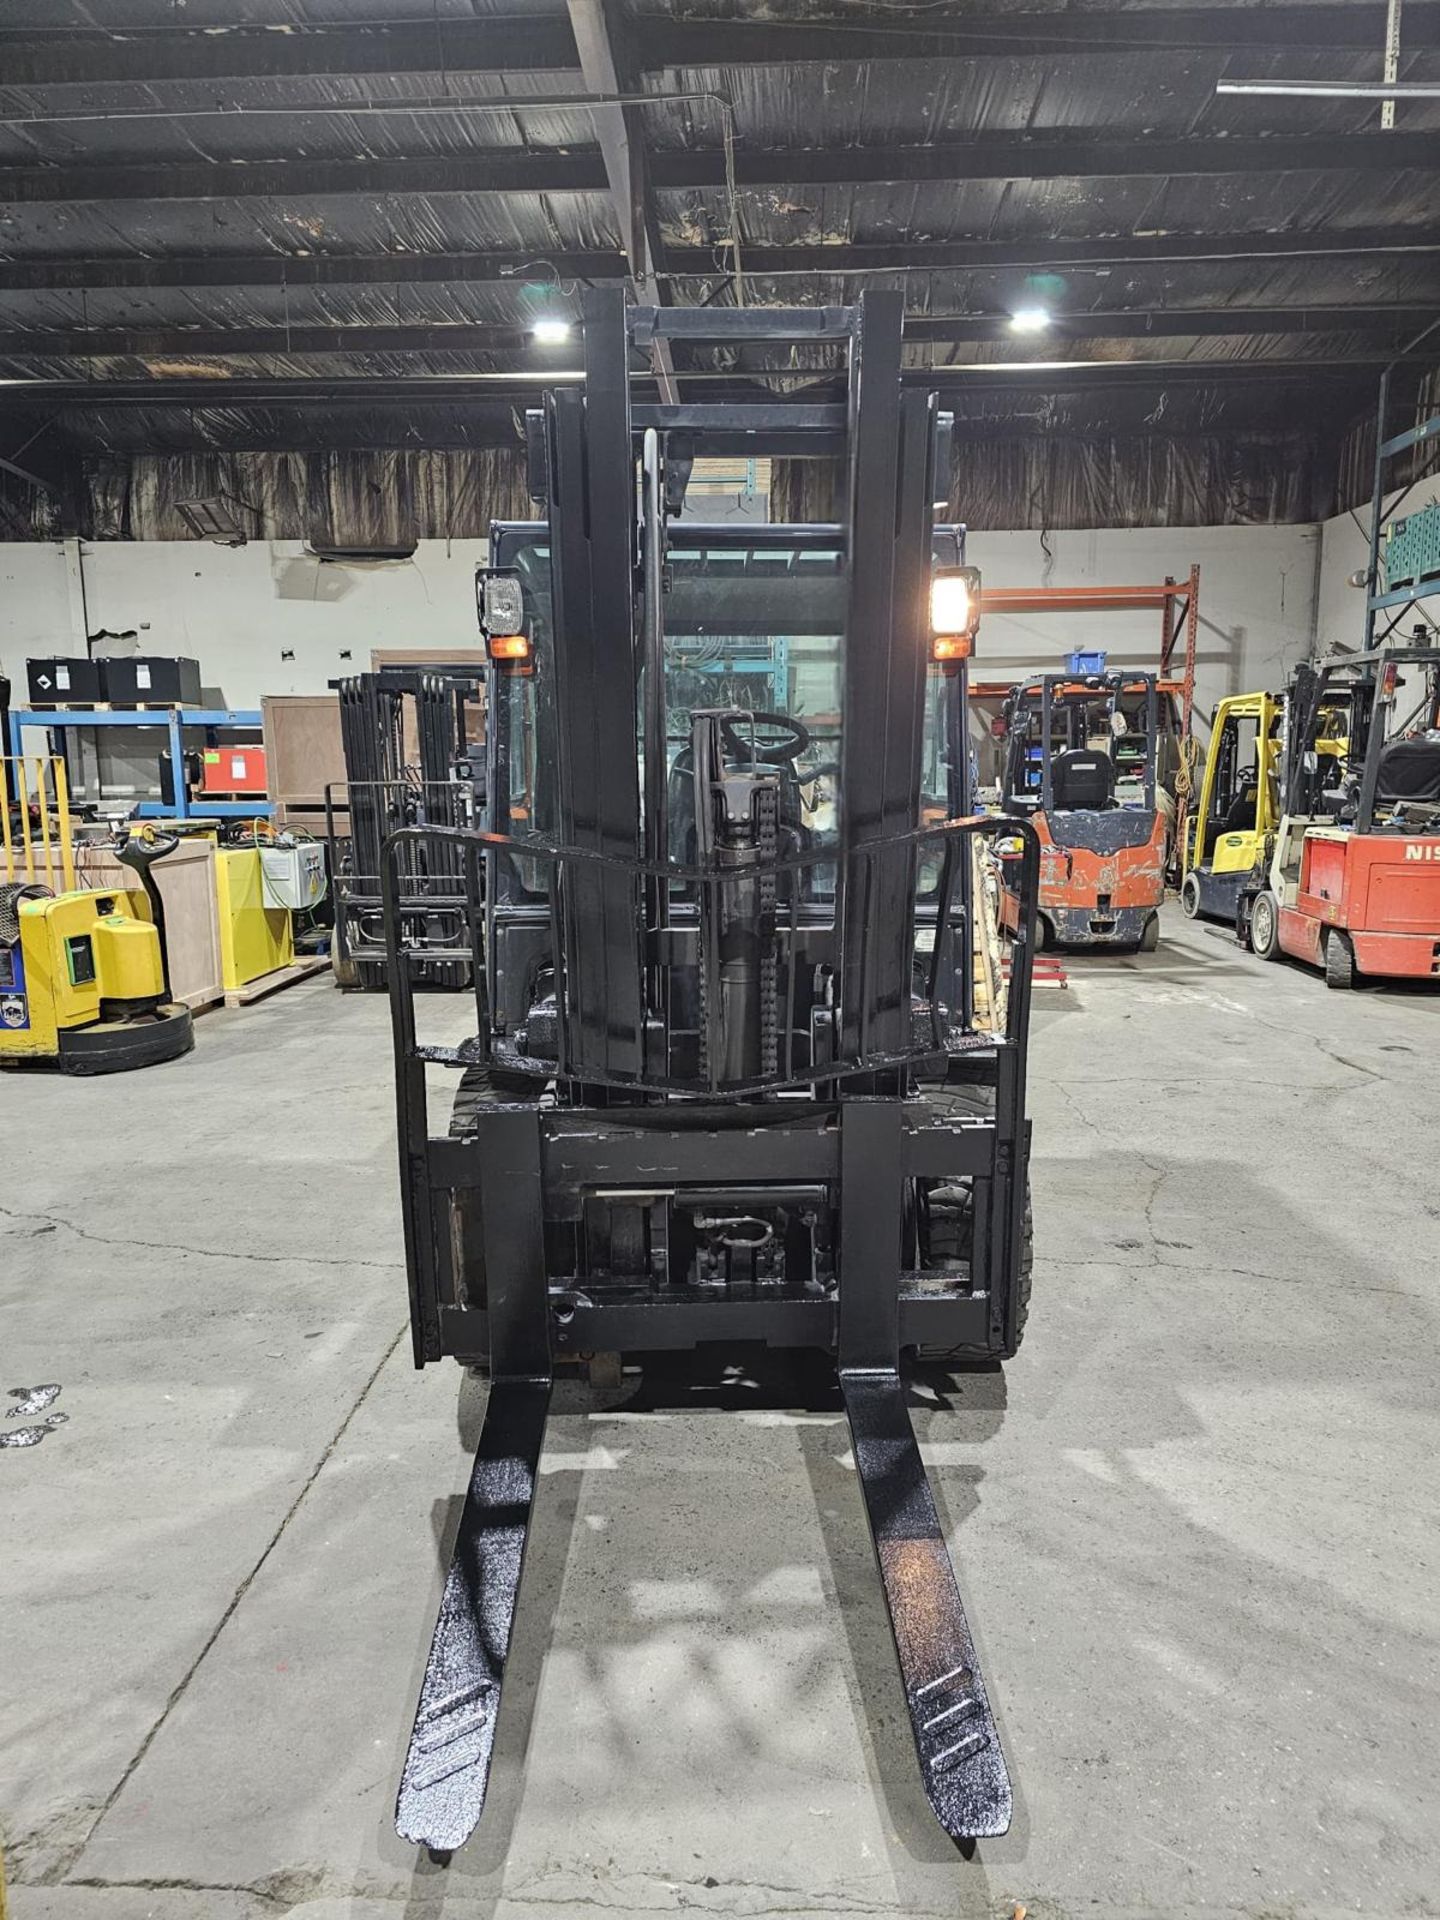 2017 Doosan 8,000 Capacity OUTDOOR LPG (Propane) Forklift with sideshift & 3-STAGE MAST 185" load - Image 8 of 8